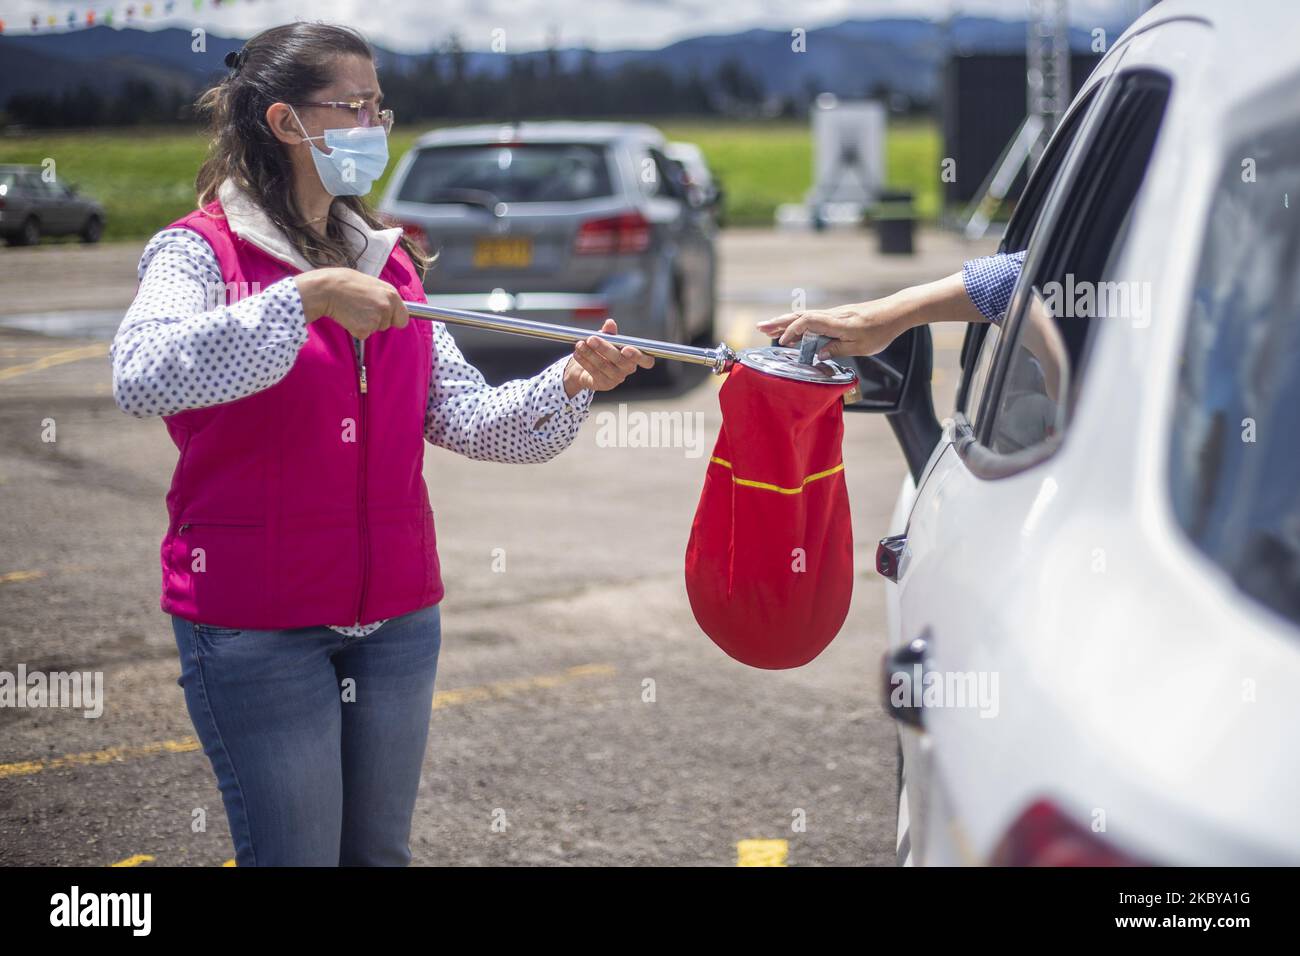 One person passes by each car receiving donations in the car at the Los Andes racecourse in the city of Bogota, Colombia, on September 6, 2020. (Photo by Daniel Garzon Herazo/NurPhoto) Stock Photo